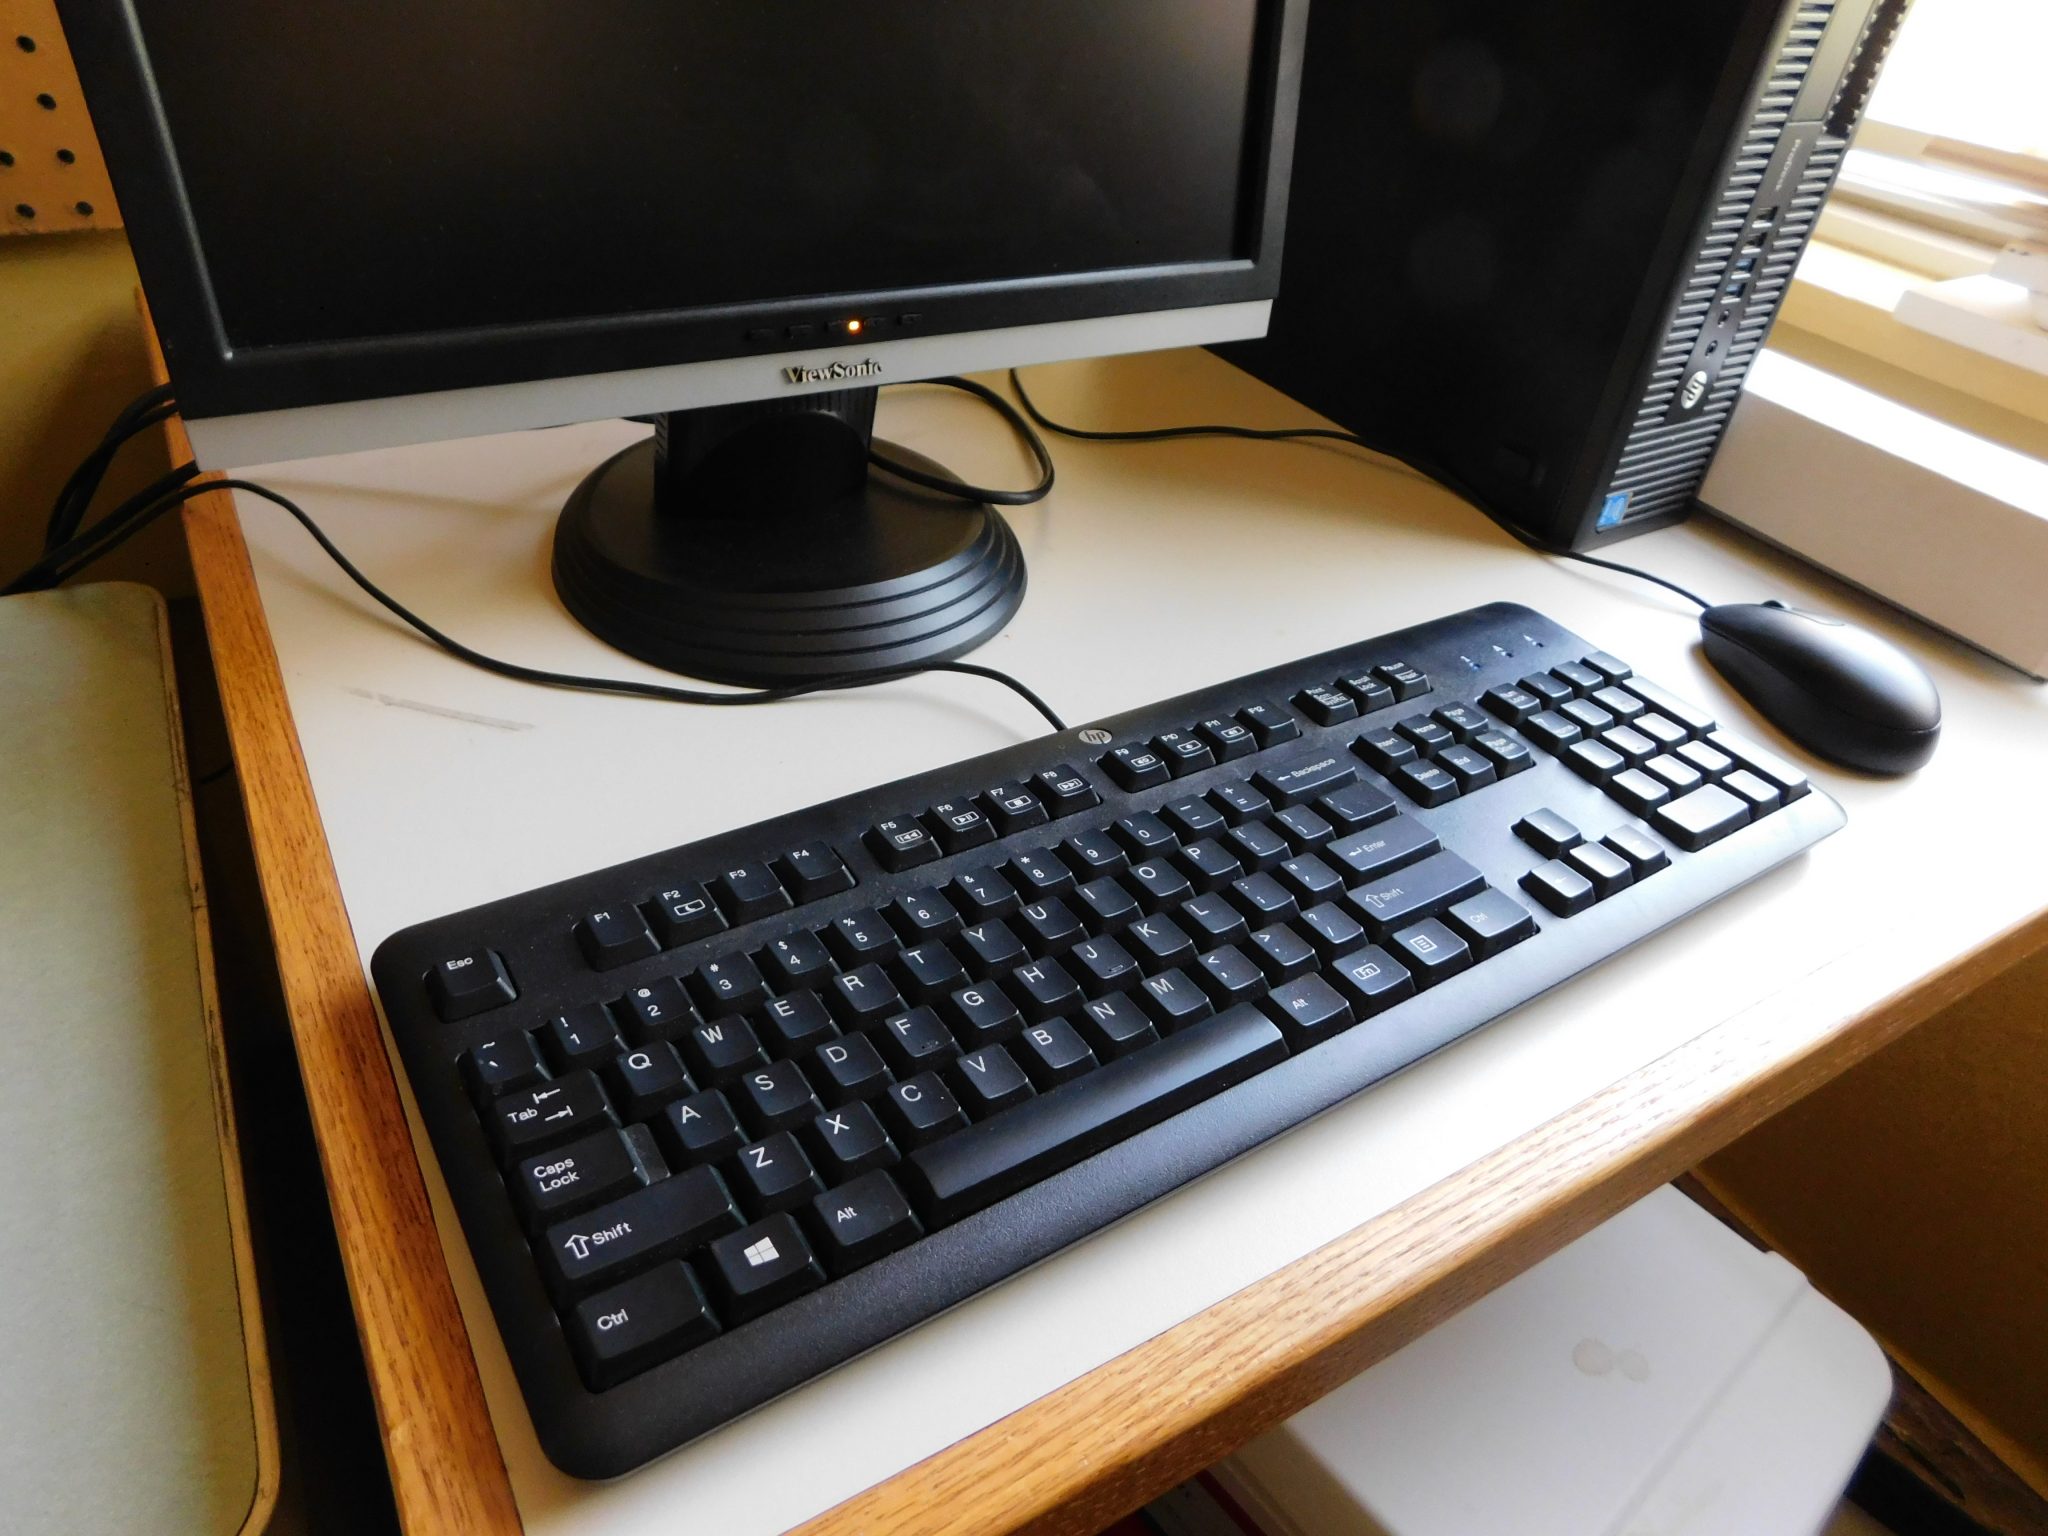 Image of keyboard, partial monitor and mouse